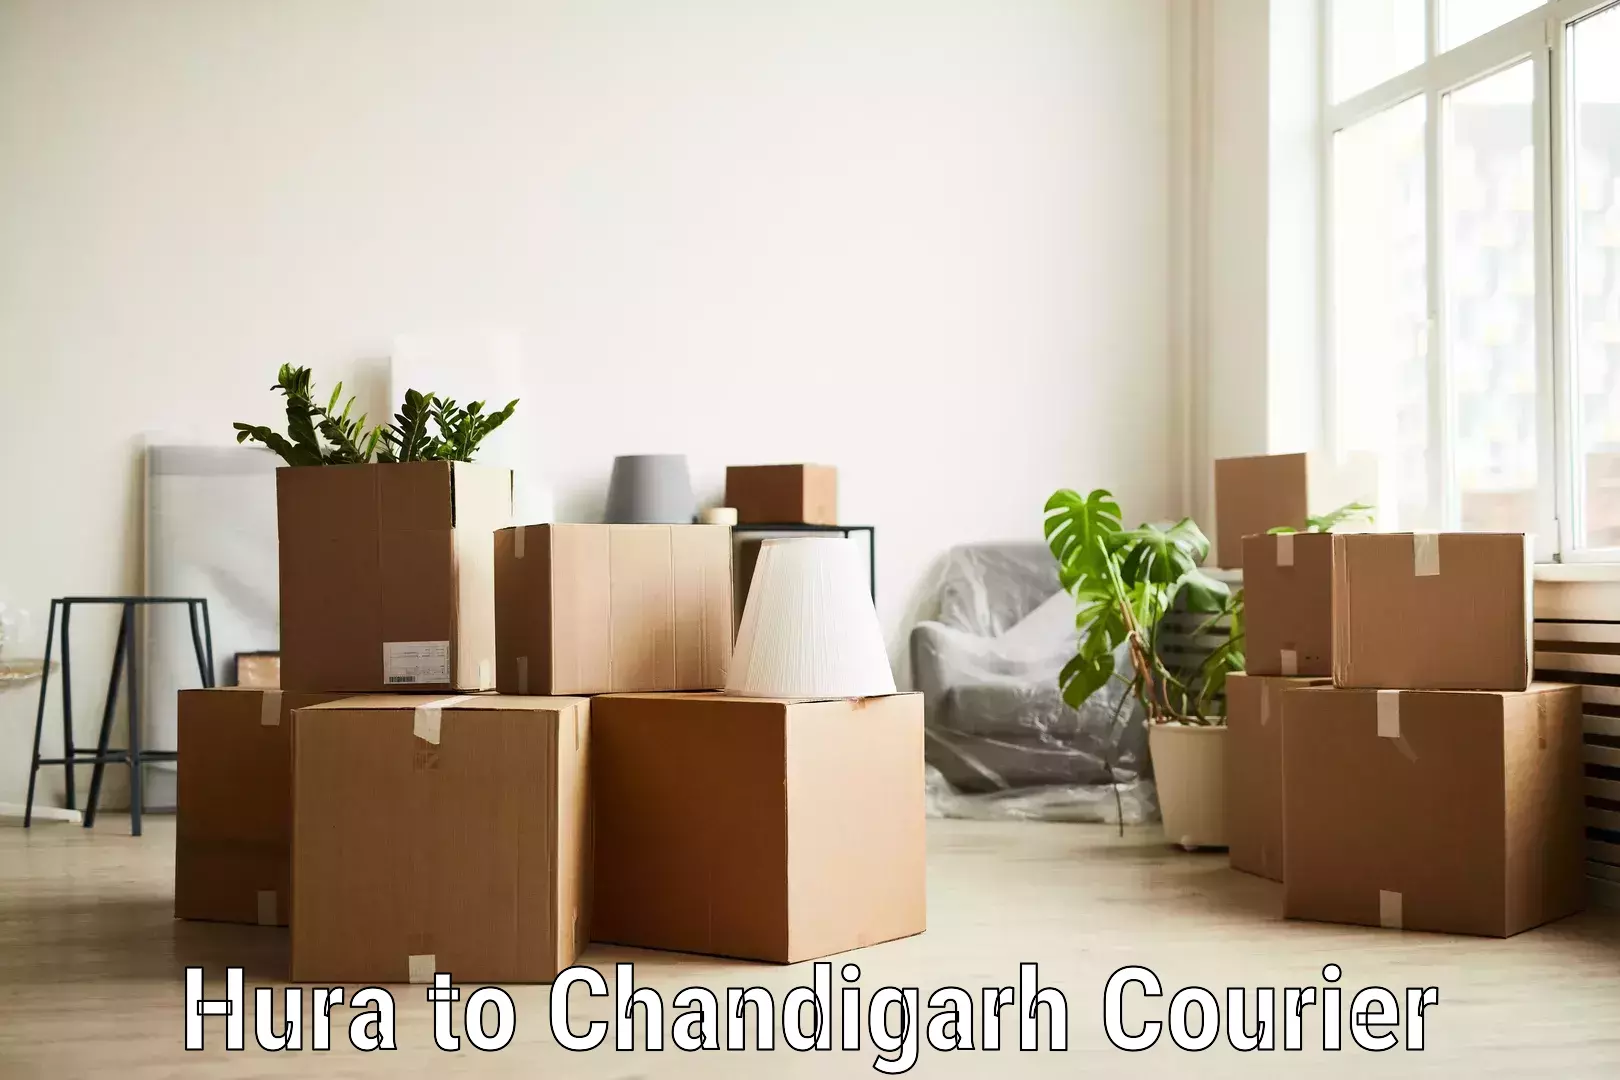 Efficient package consolidation Hura to Chandigarh